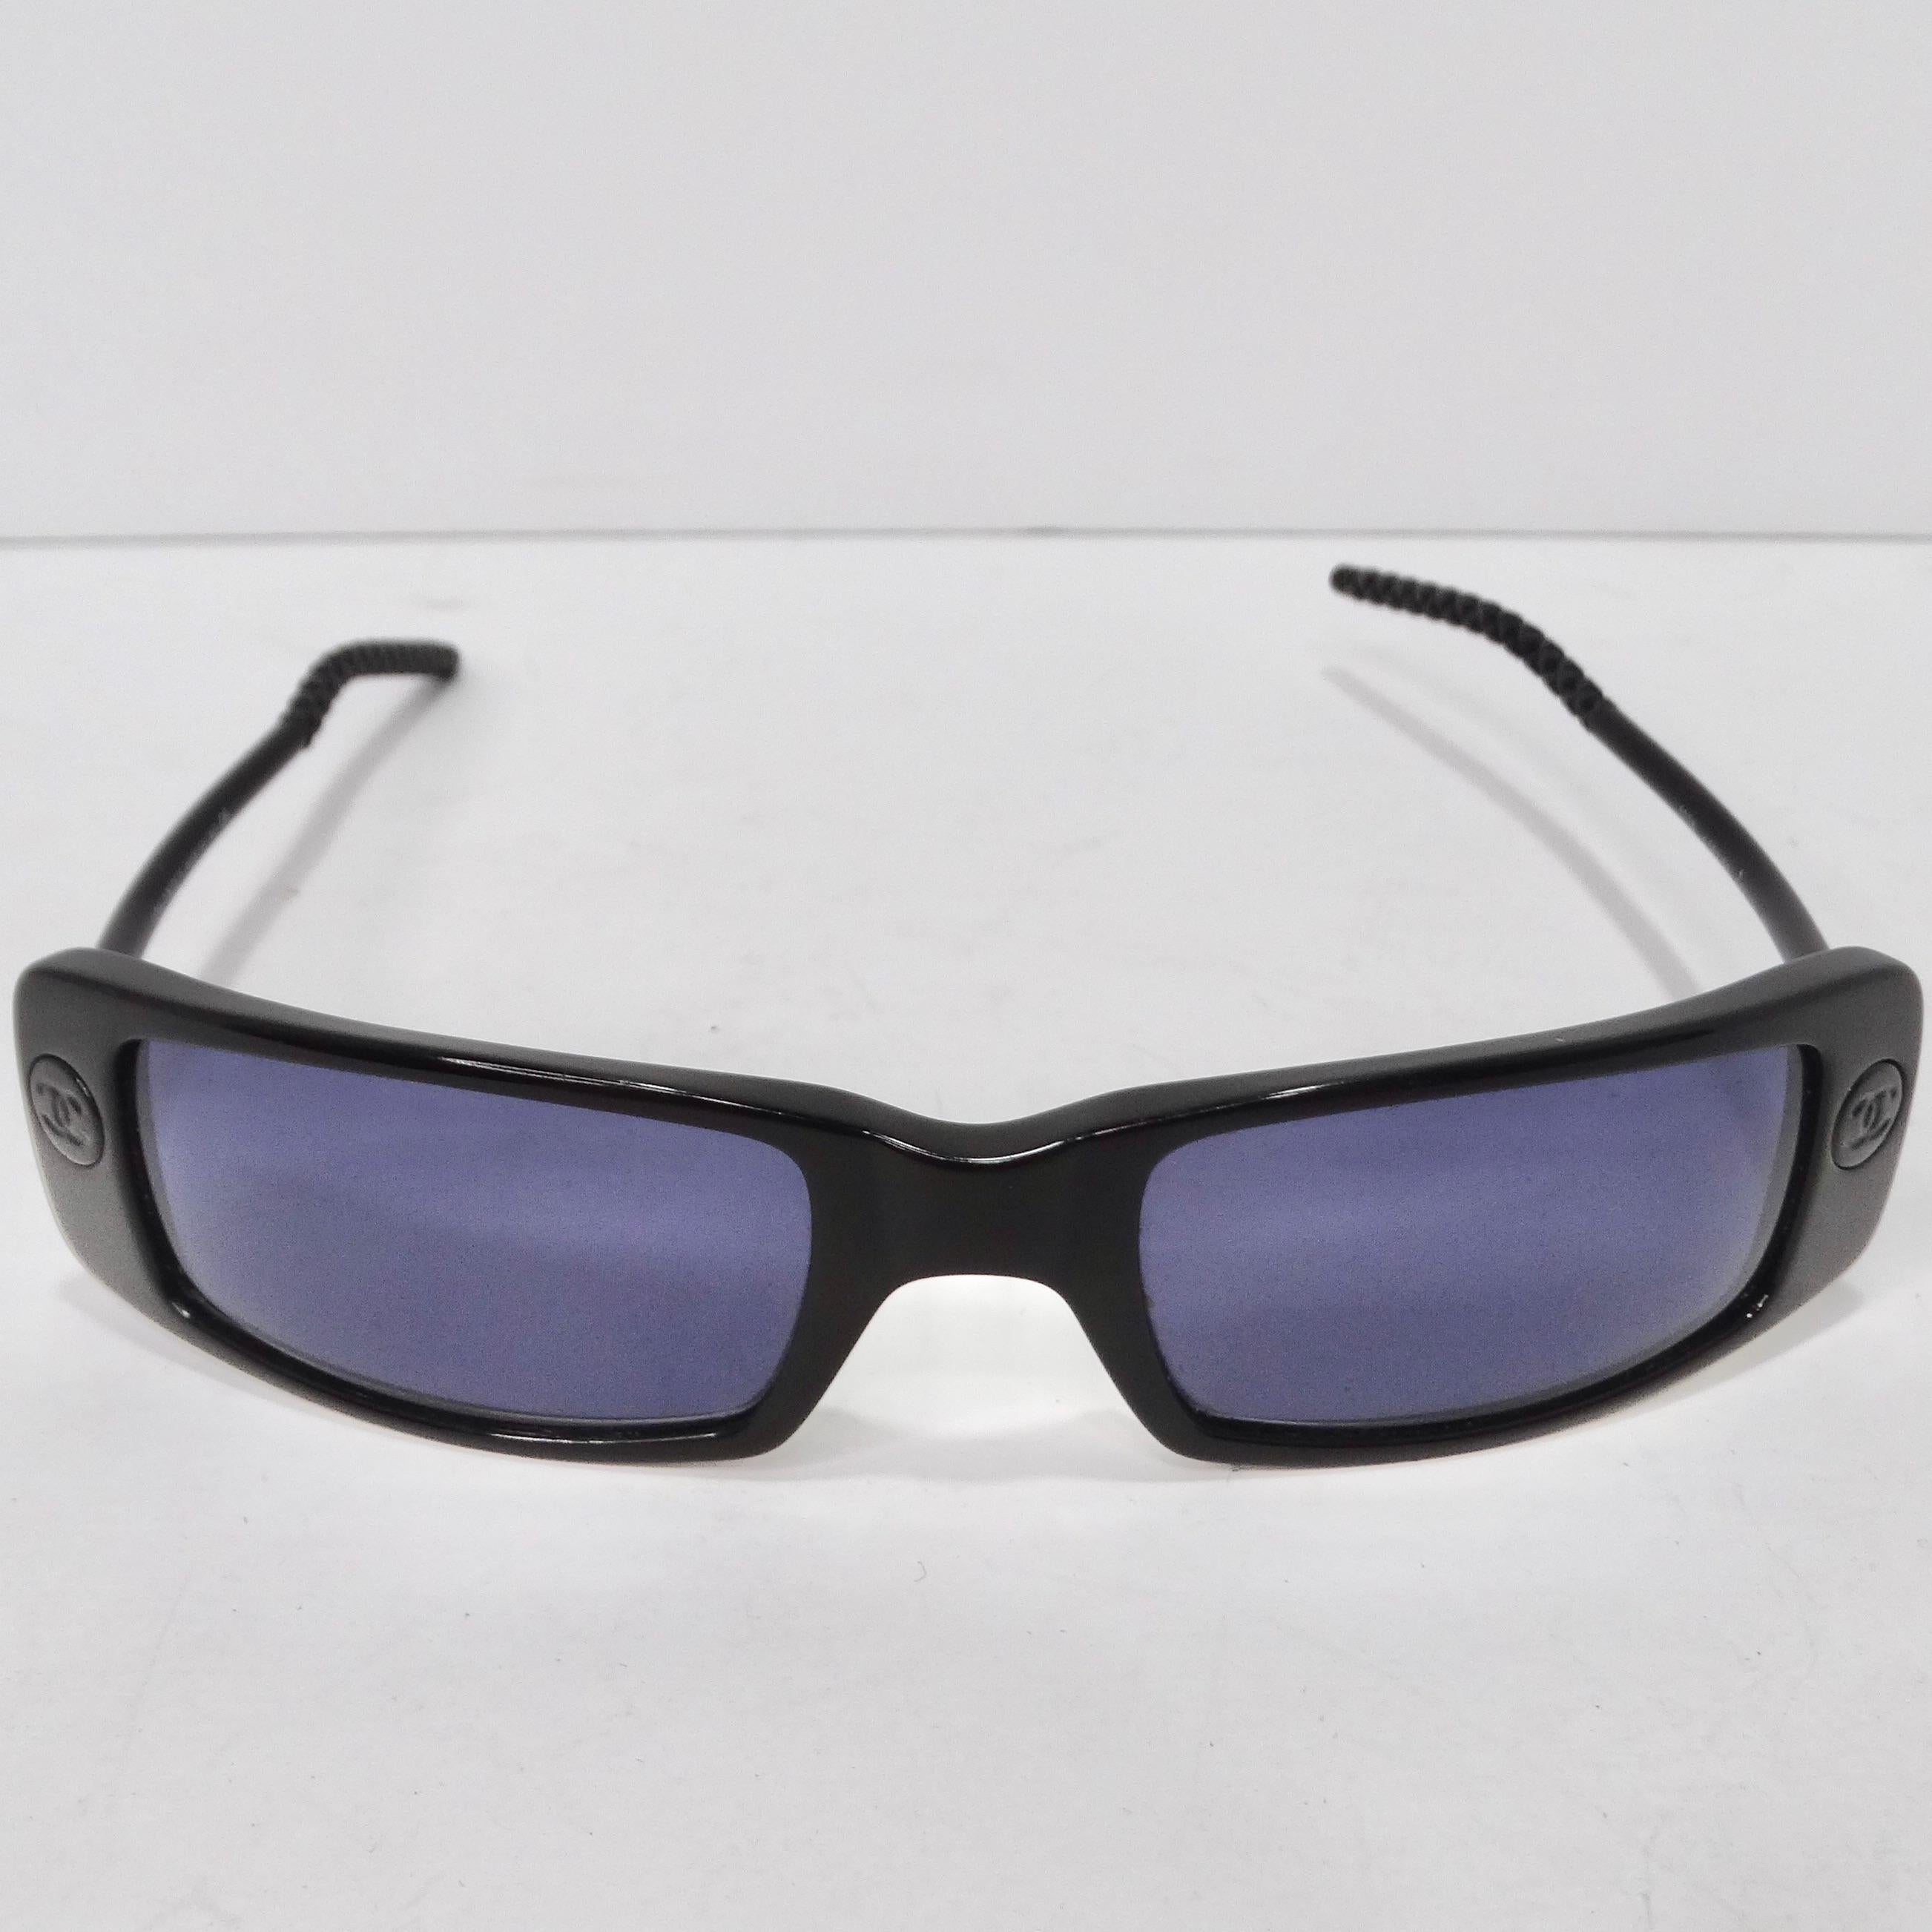 Chanel Black Y2K Square Frame Sunglasses In Excellent Condition For Sale In Scottsdale, AZ